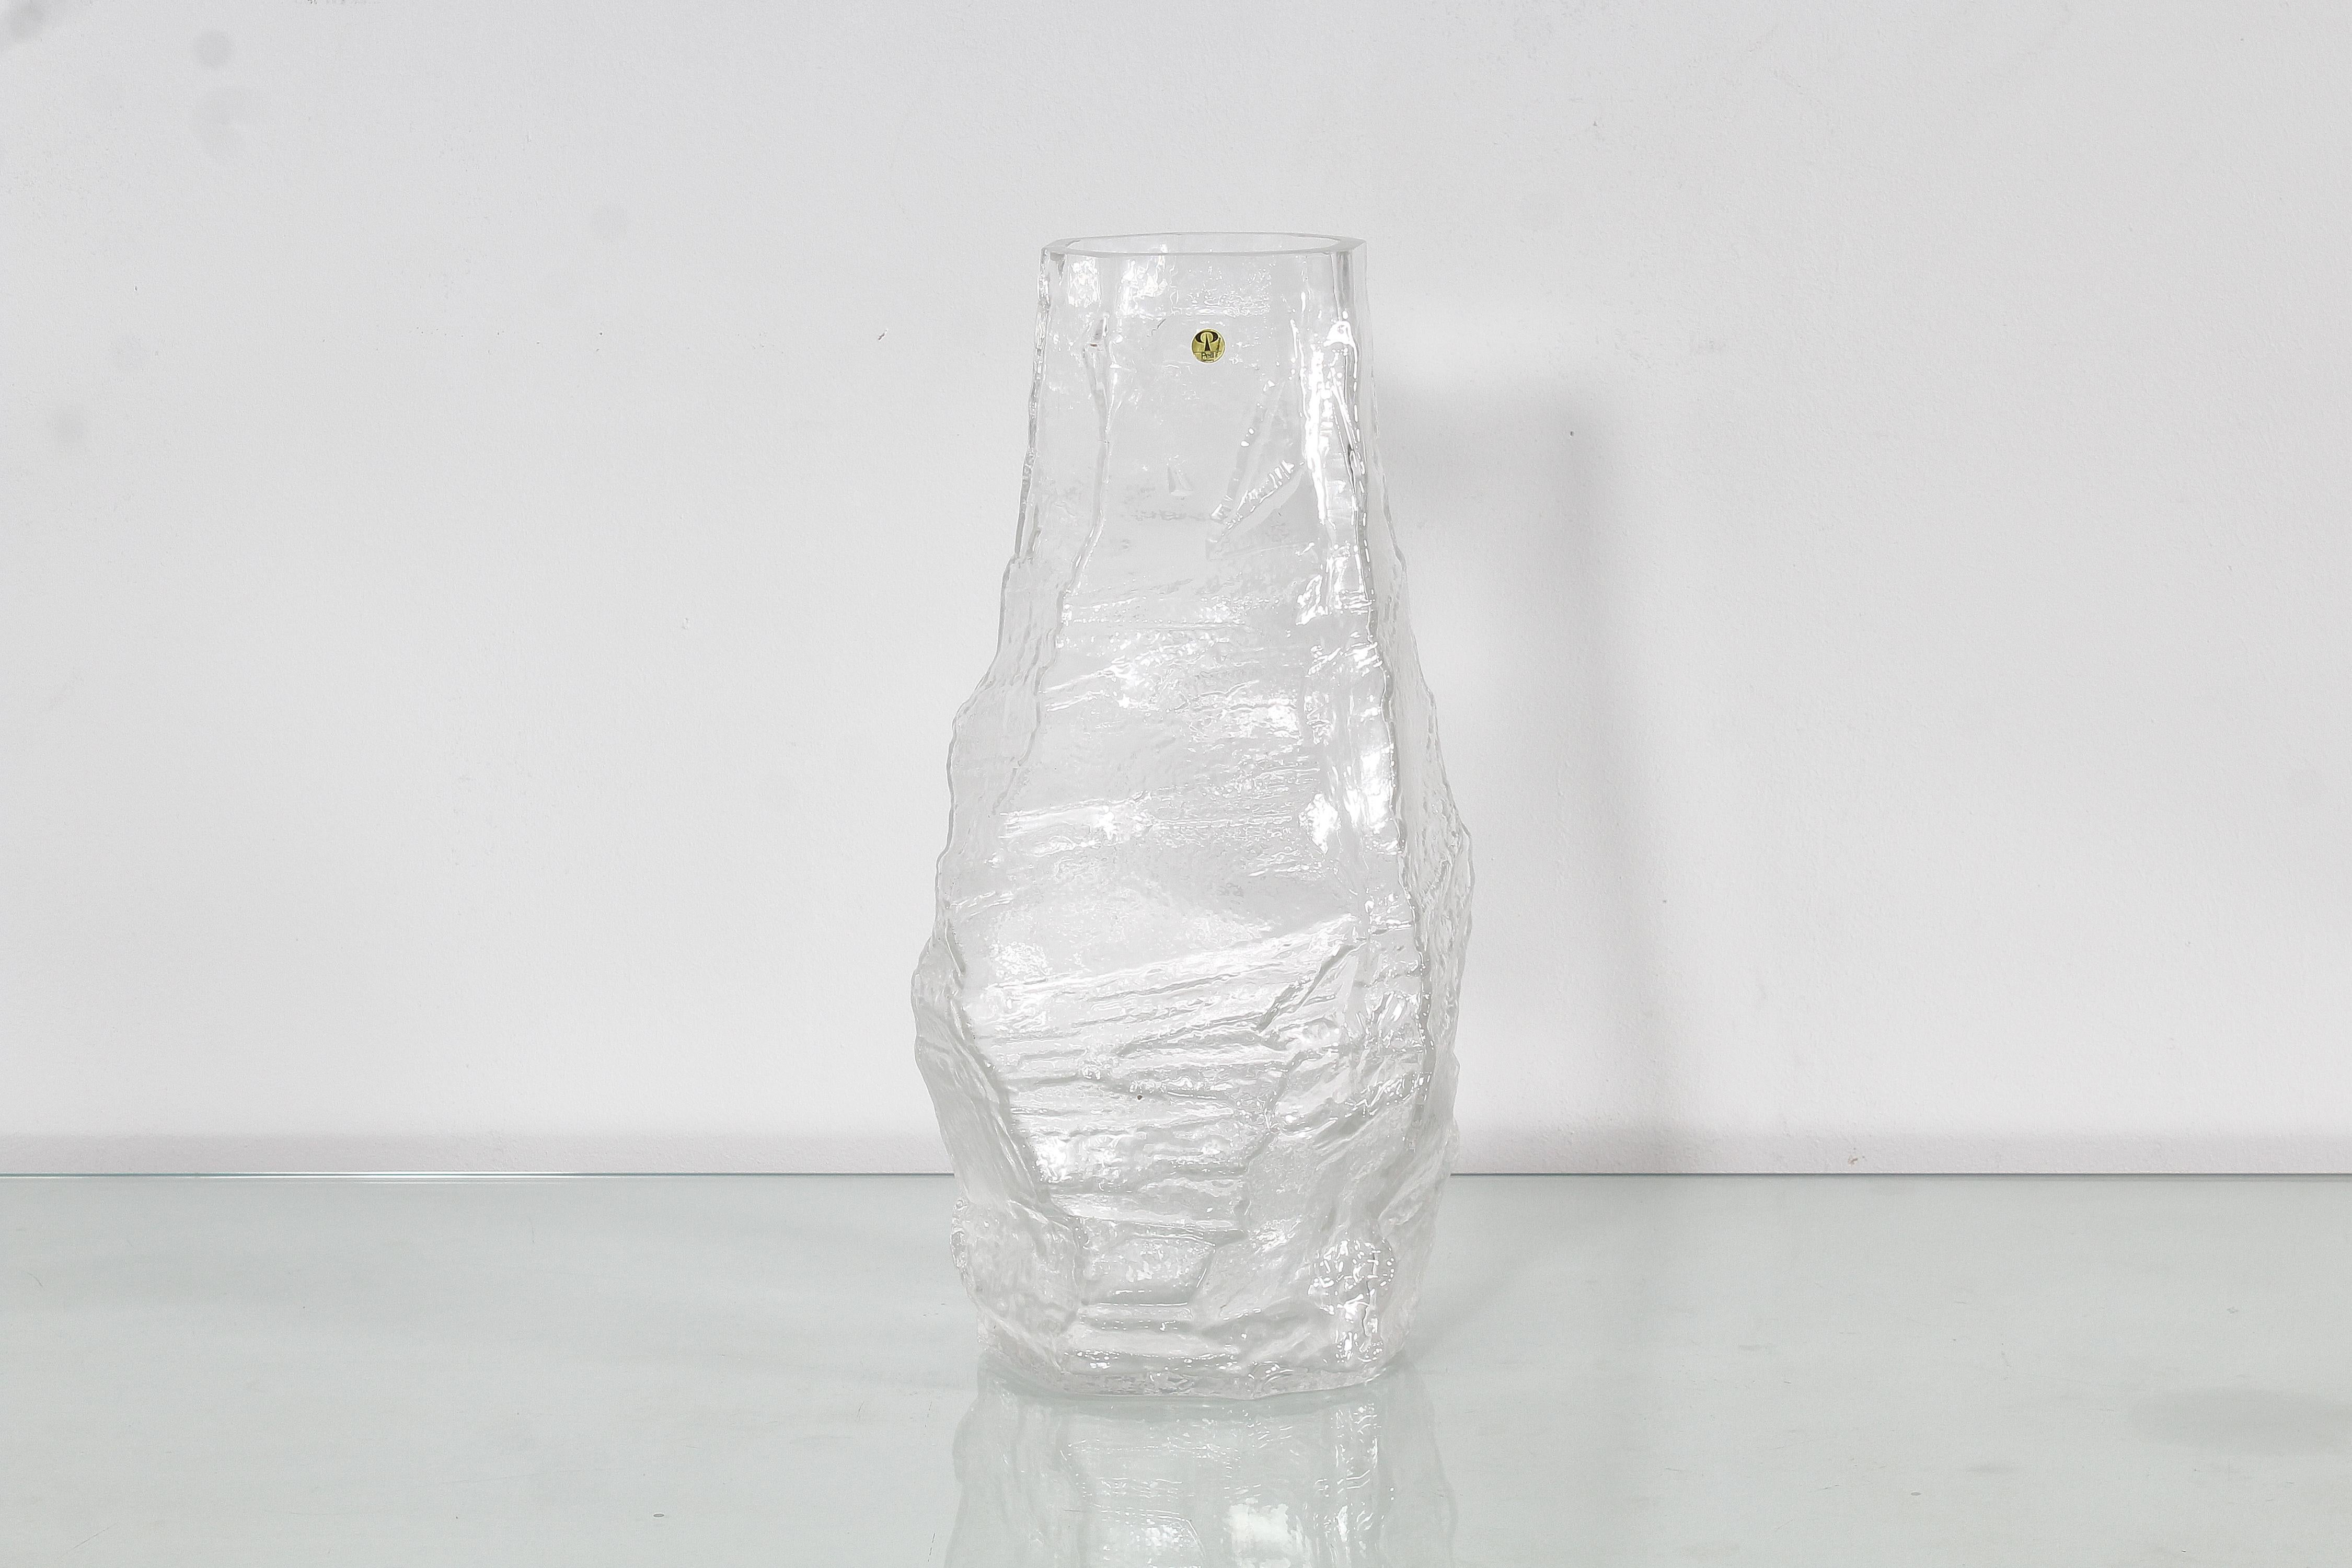 Beautiful and unusual thick and heavy 'glacier' clear glass vase, with an irregular shape, made by Peill & Putzler of Germany, in 1970s. Manufacturer's label near the edge. 
Wear consistent with age and use.